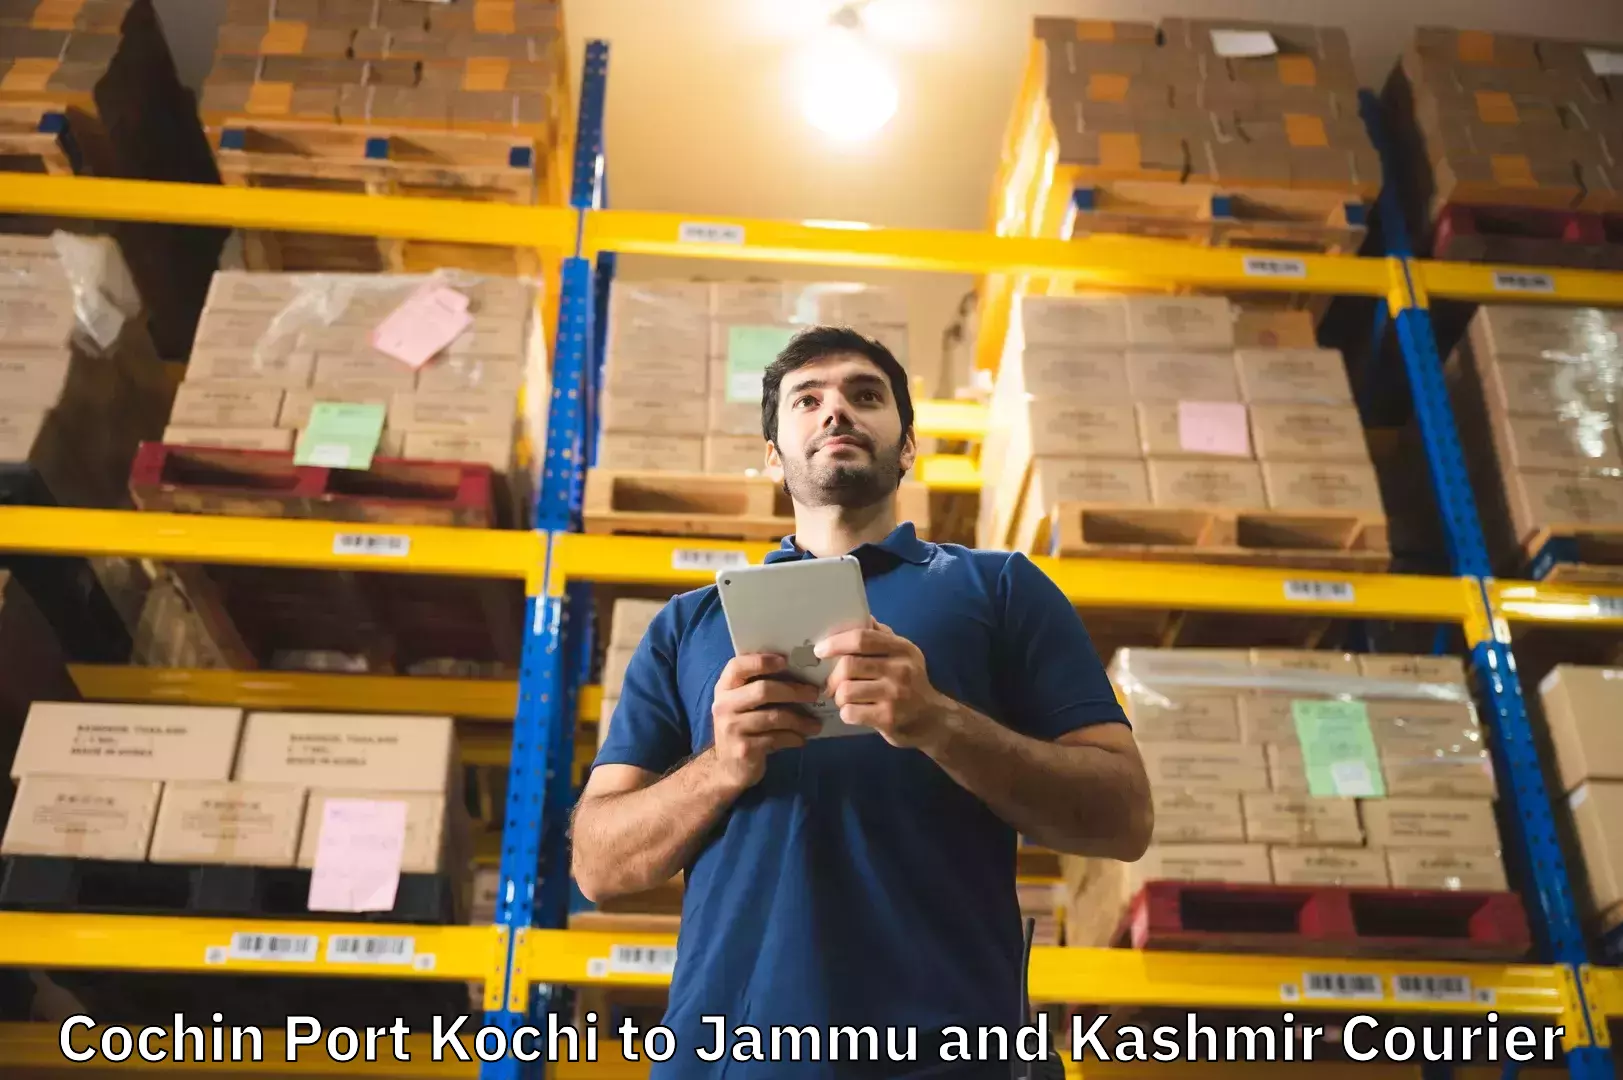 Discounted baggage transport in Cochin Port Kochi to Jammu and Kashmir